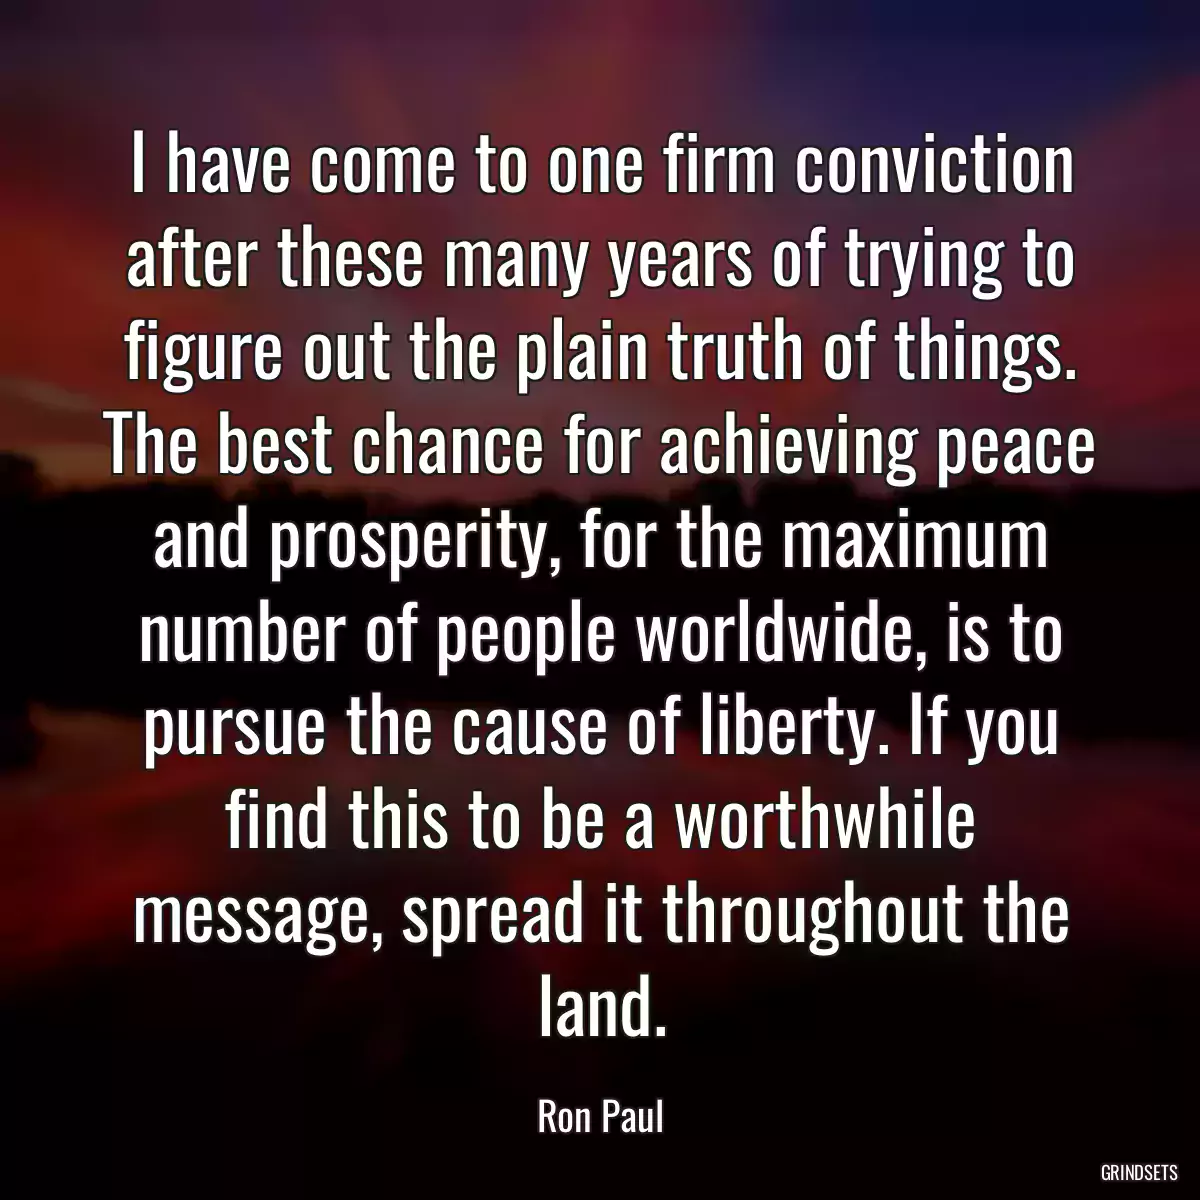 I have come to one firm conviction after these many years of trying to figure out the plain truth of things. The best chance for achieving peace and prosperity, for the maximum number of people worldwide, is to pursue the cause of liberty. If you find this to be a worthwhile message, spread it throughout the land.